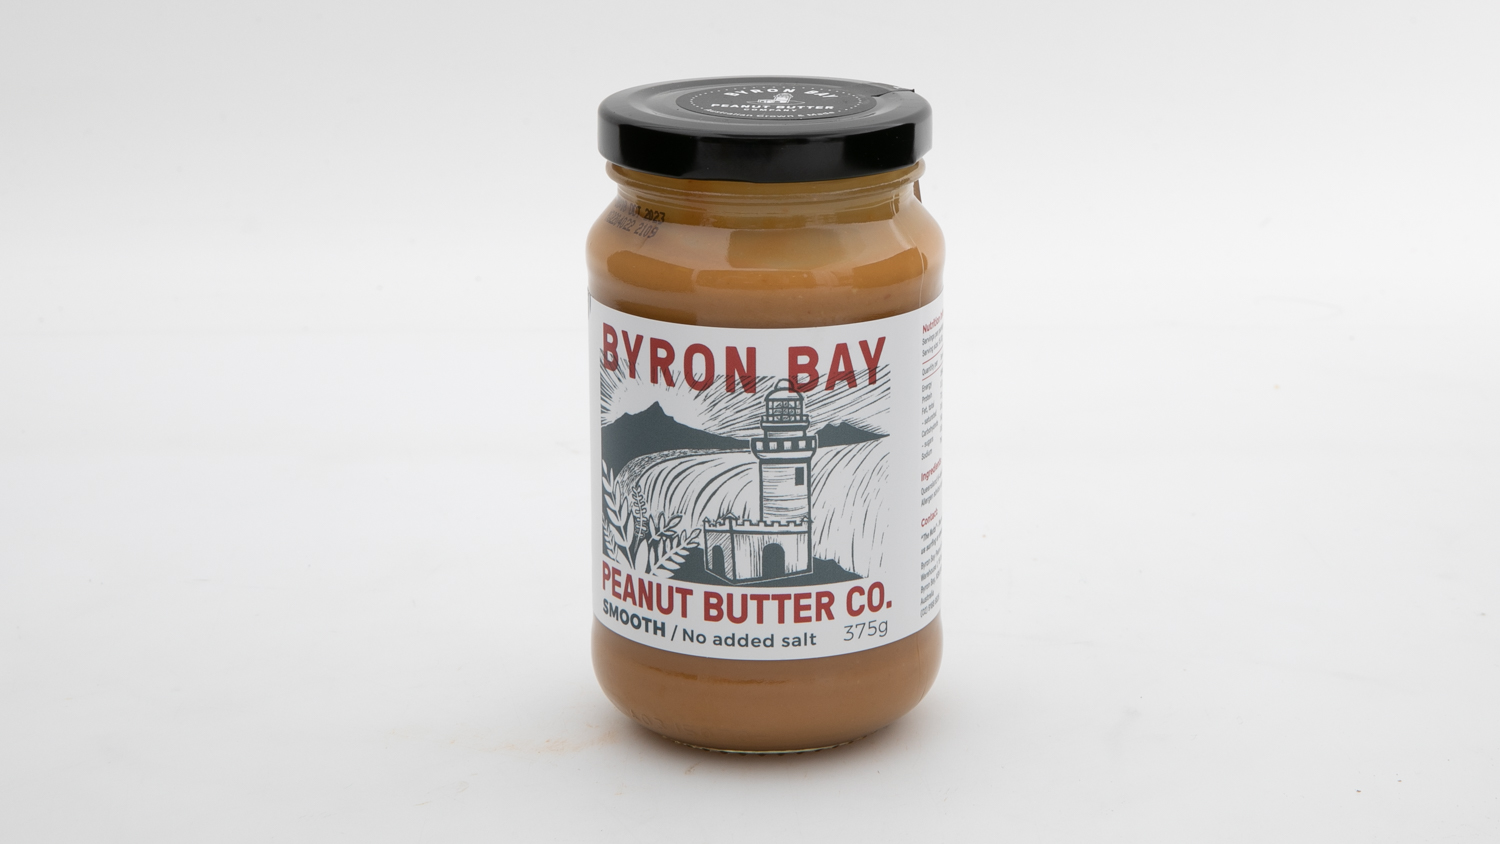 Byron Bay Peanut Butter Co Smooth, No Added Salt carousel image